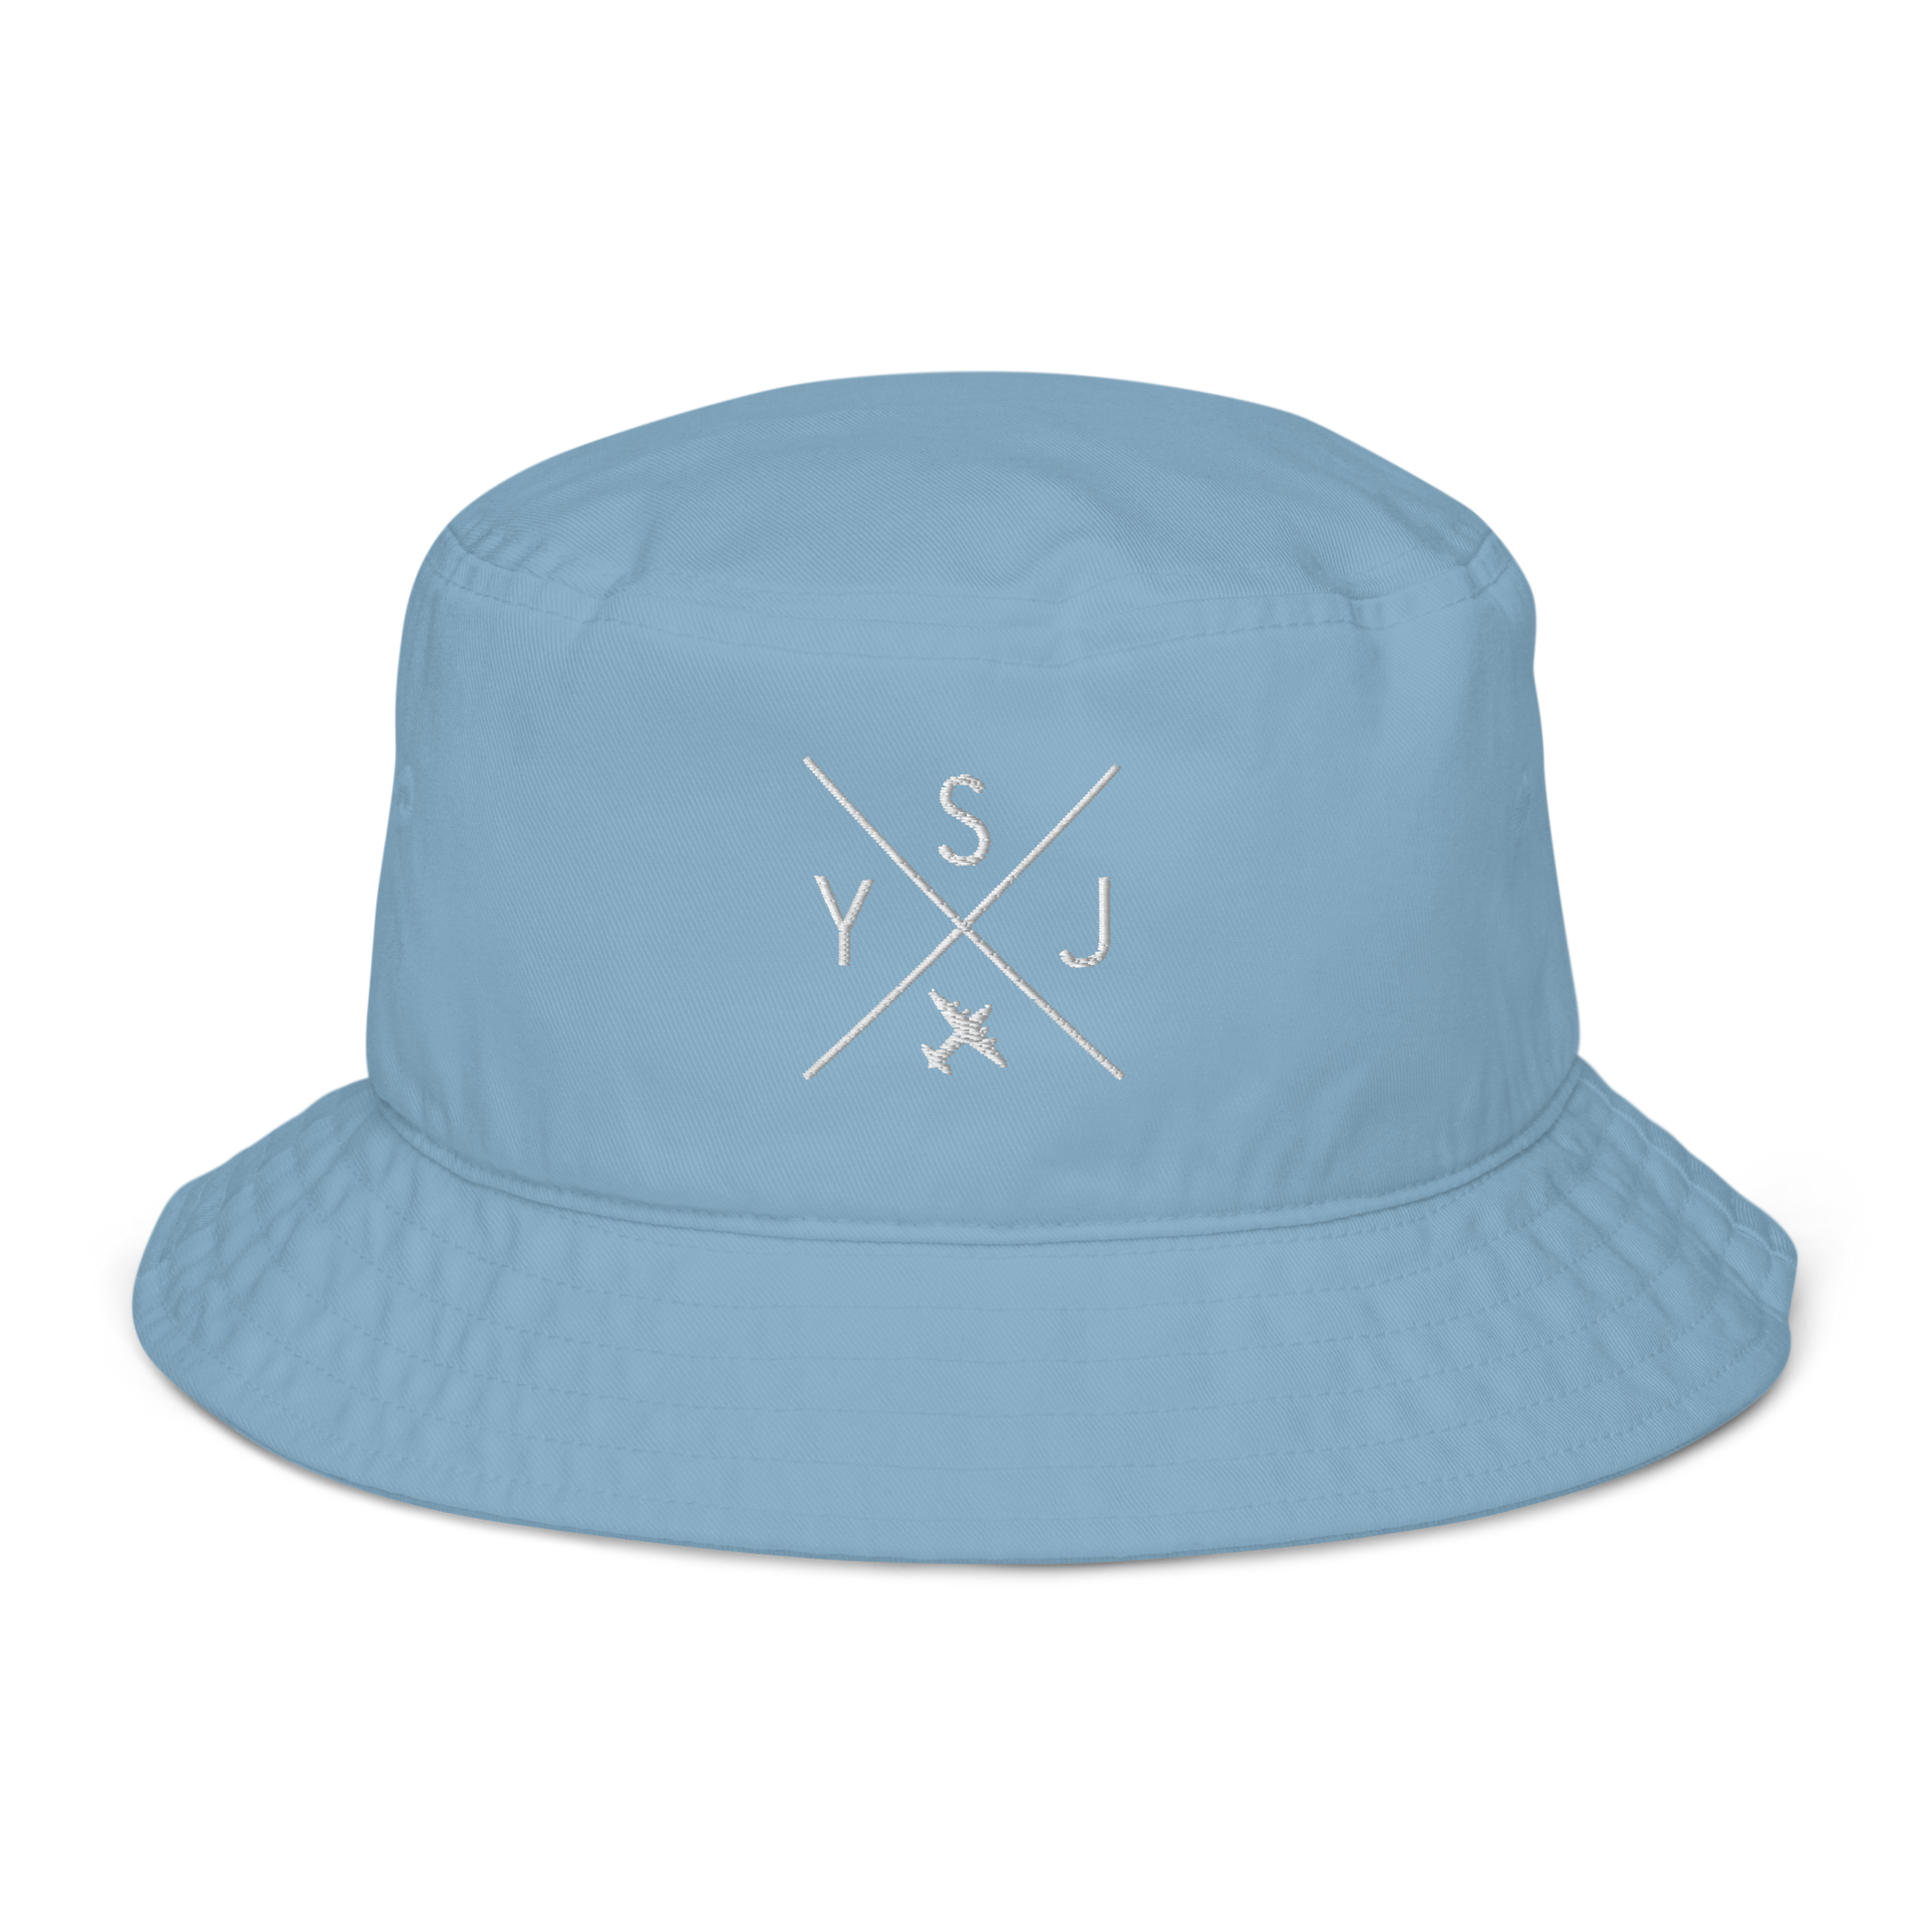 YHM Designs - YSJ Saint John Organic Cotton Bucket Hat - Crossed-X Design with Airport Code and Vintage Propliner - White Embroidery - Image 07